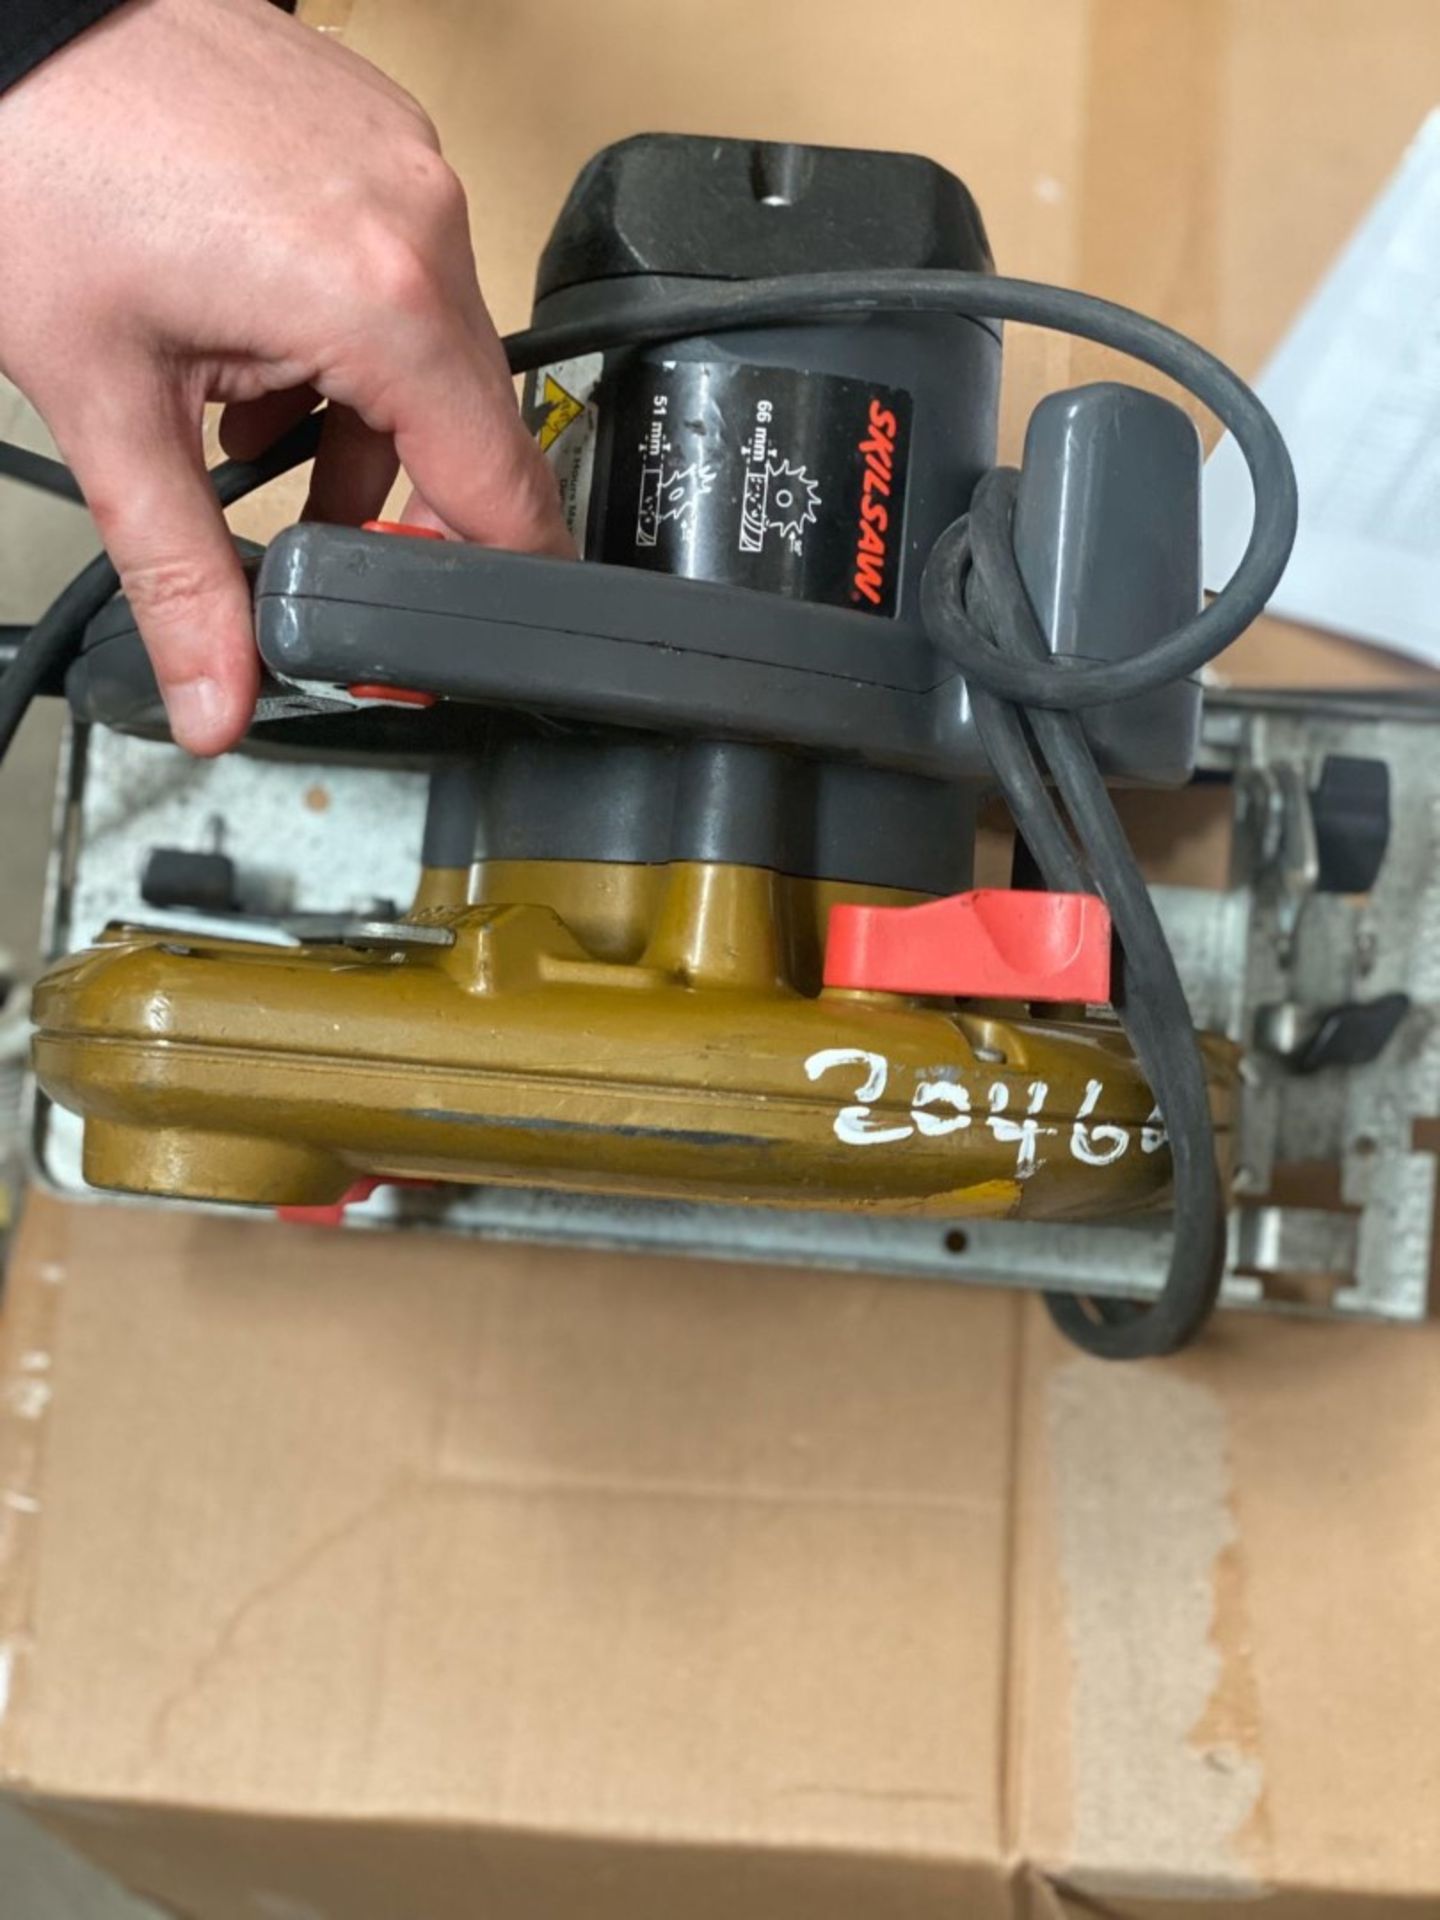 1 x Skill 110v Saw - Used, Recently Removed From A Working Site - CL505 - Ref: TL017 - Location: - Image 2 of 3